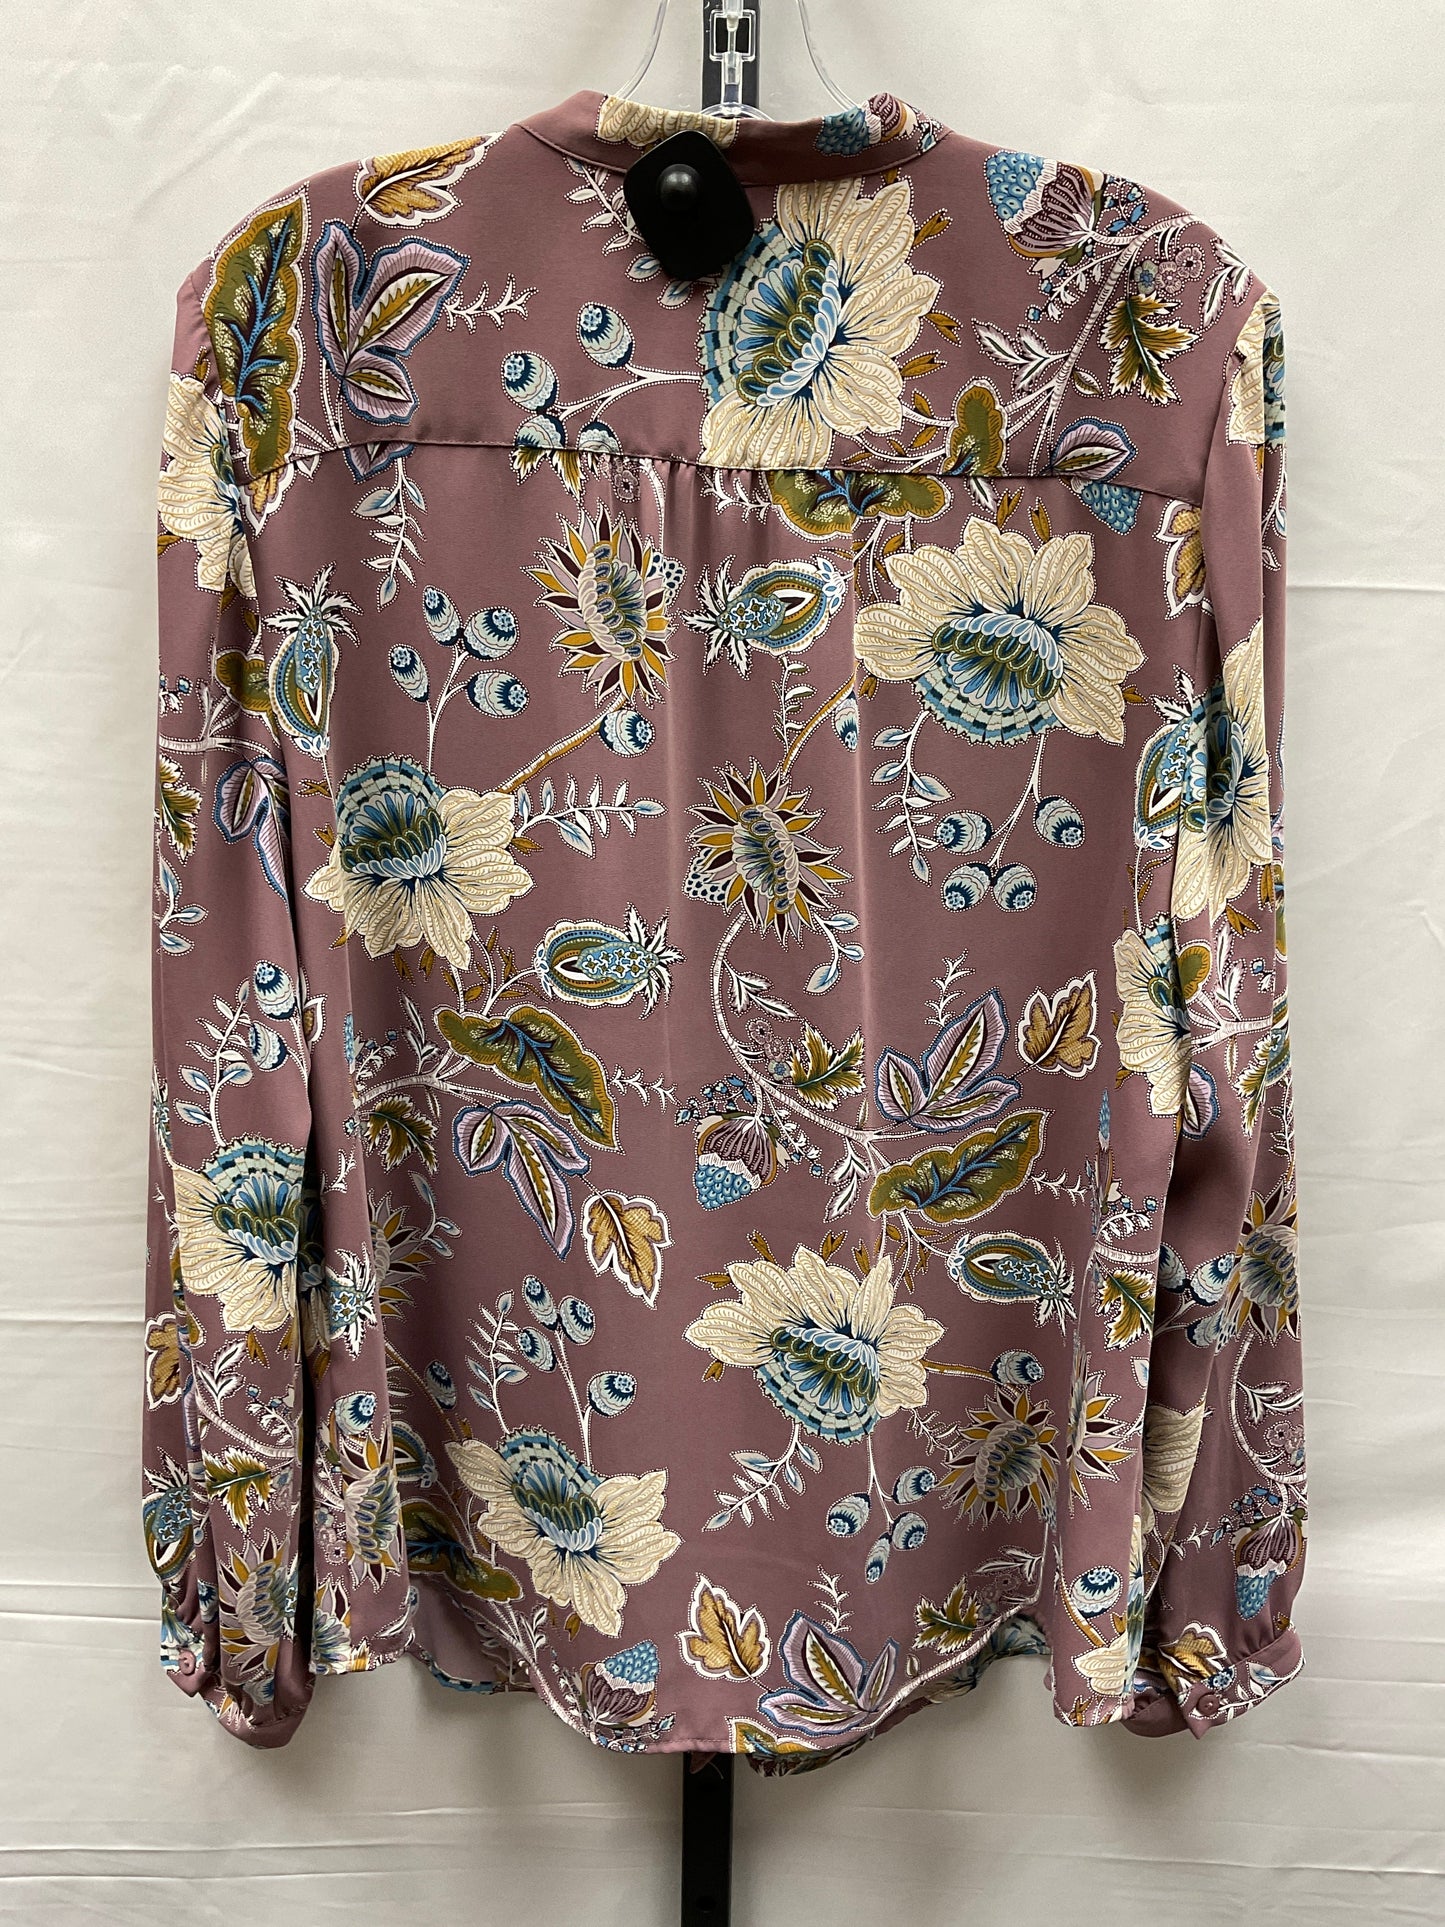 Paisley Print Top Long Sleeve Chicos, Size L